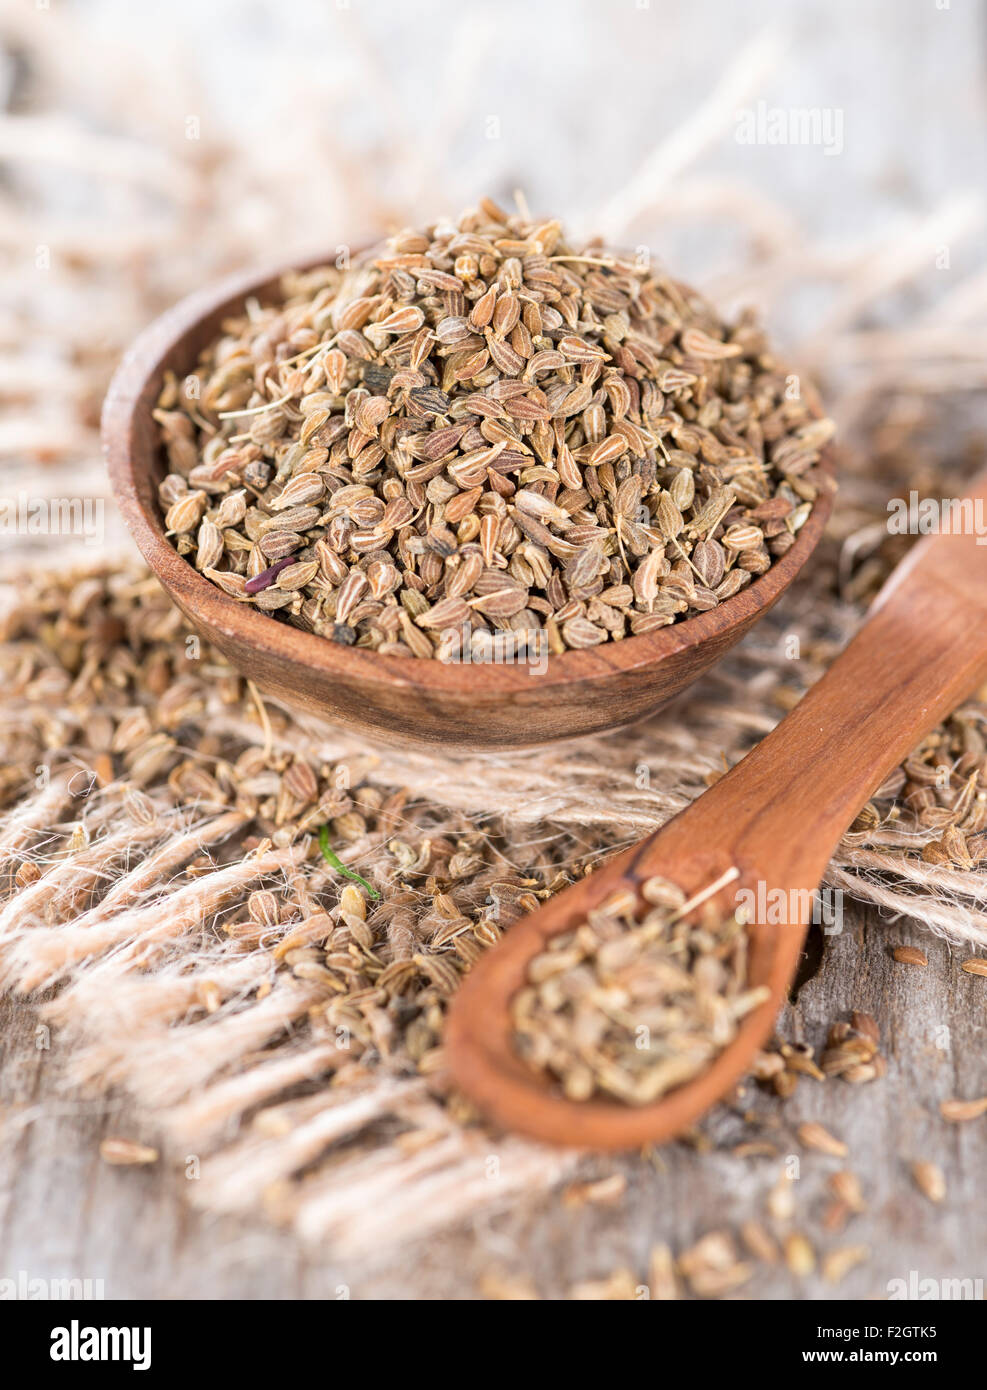 Portion of dried Anissed (detailed close-up shot) Stock Photo